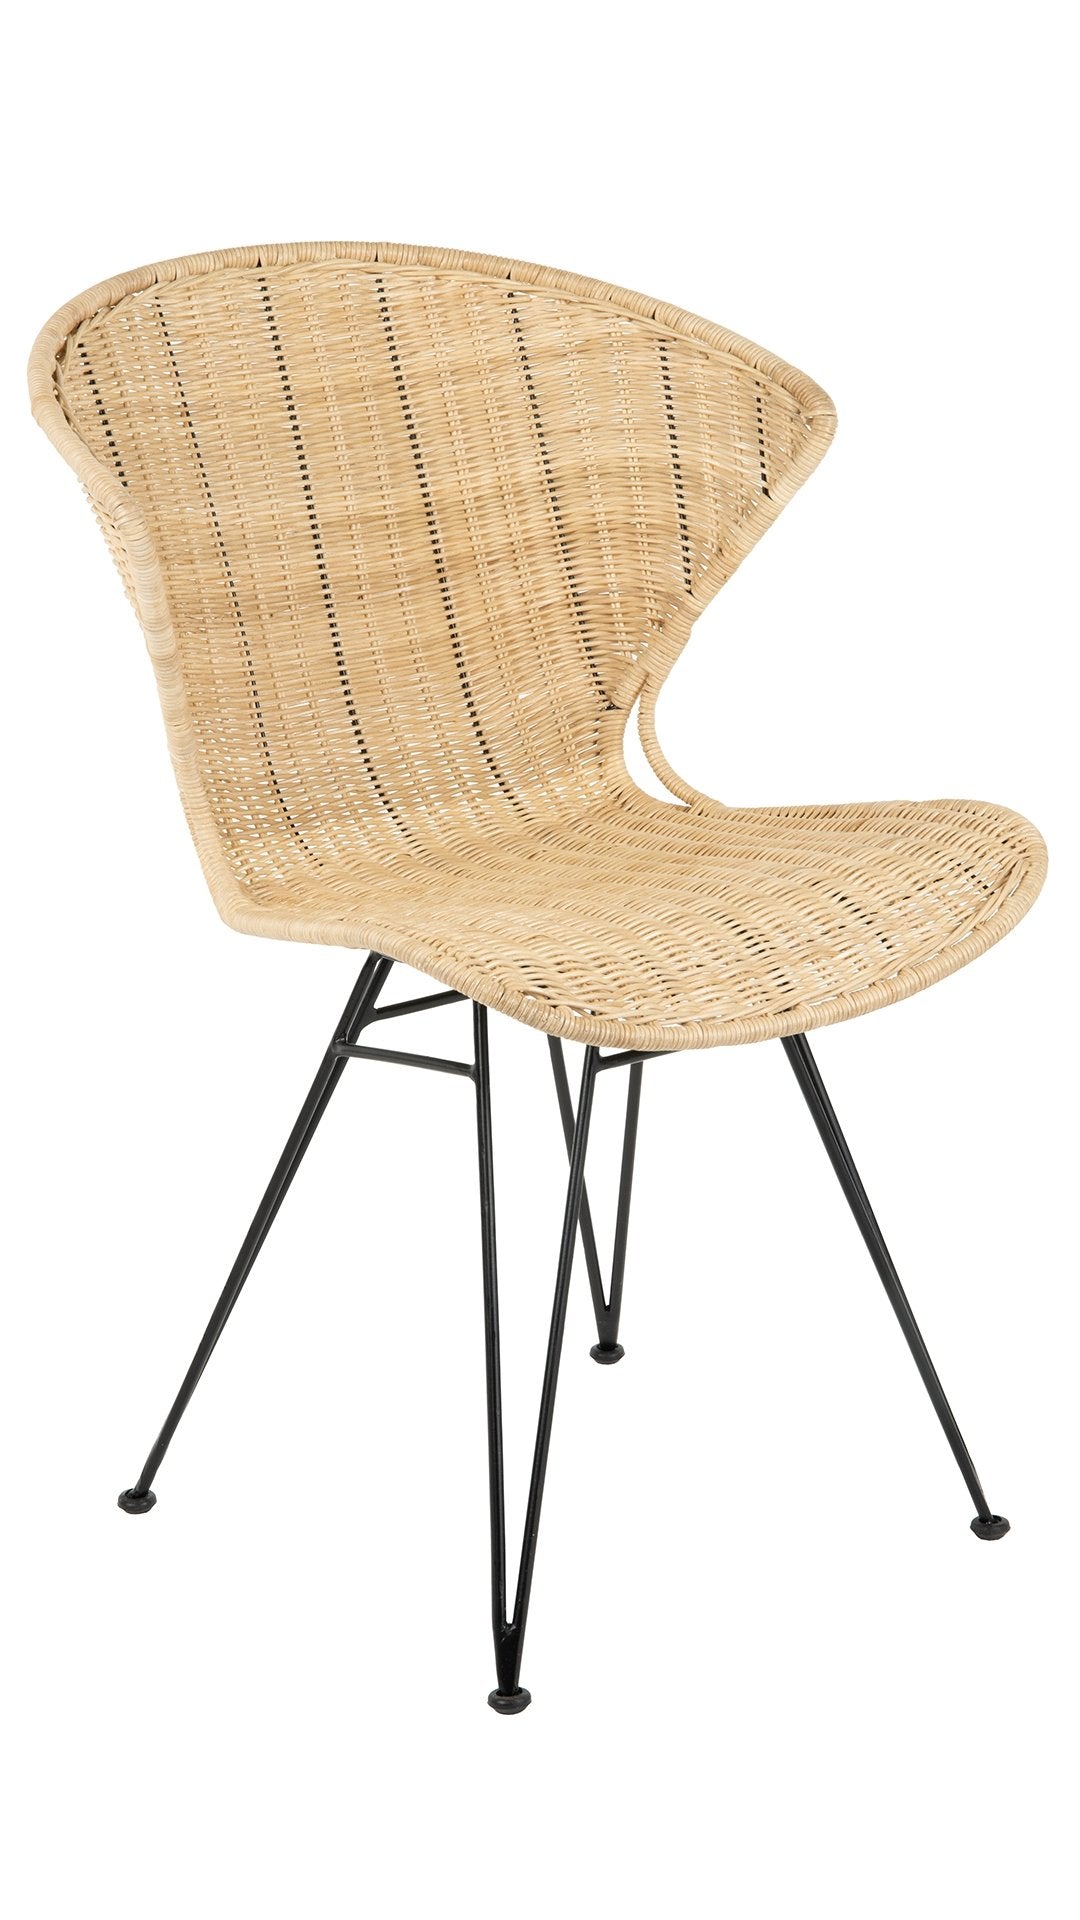 Jaro Rattan Dining Chair with Metal Legs, Natural Color & Black, Set of 2 Chairs